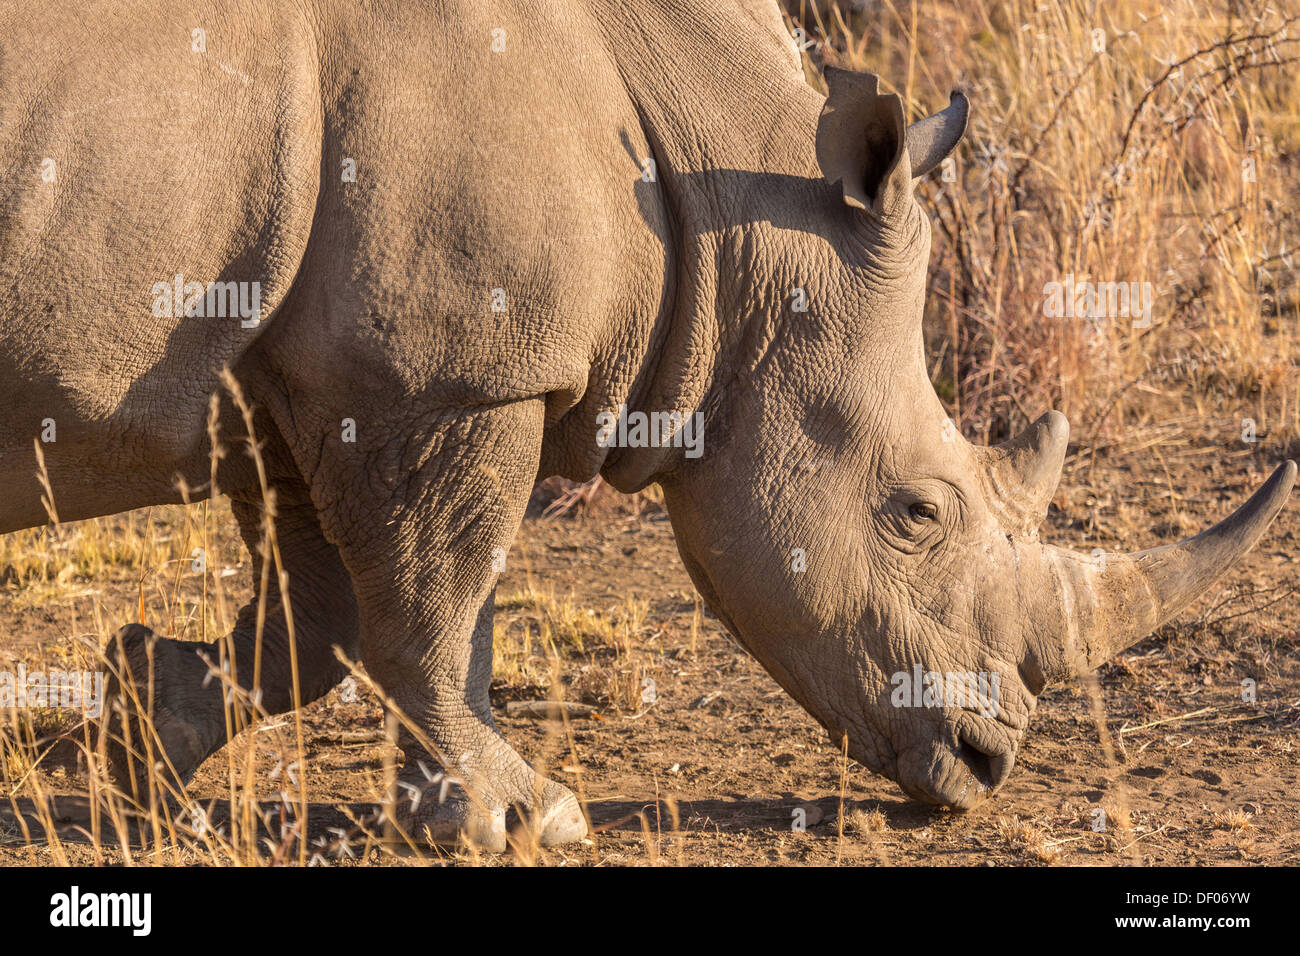 A Rhino grazing in the dry savannah lands of Pilanesberg National Park, South Africa Stock Photo